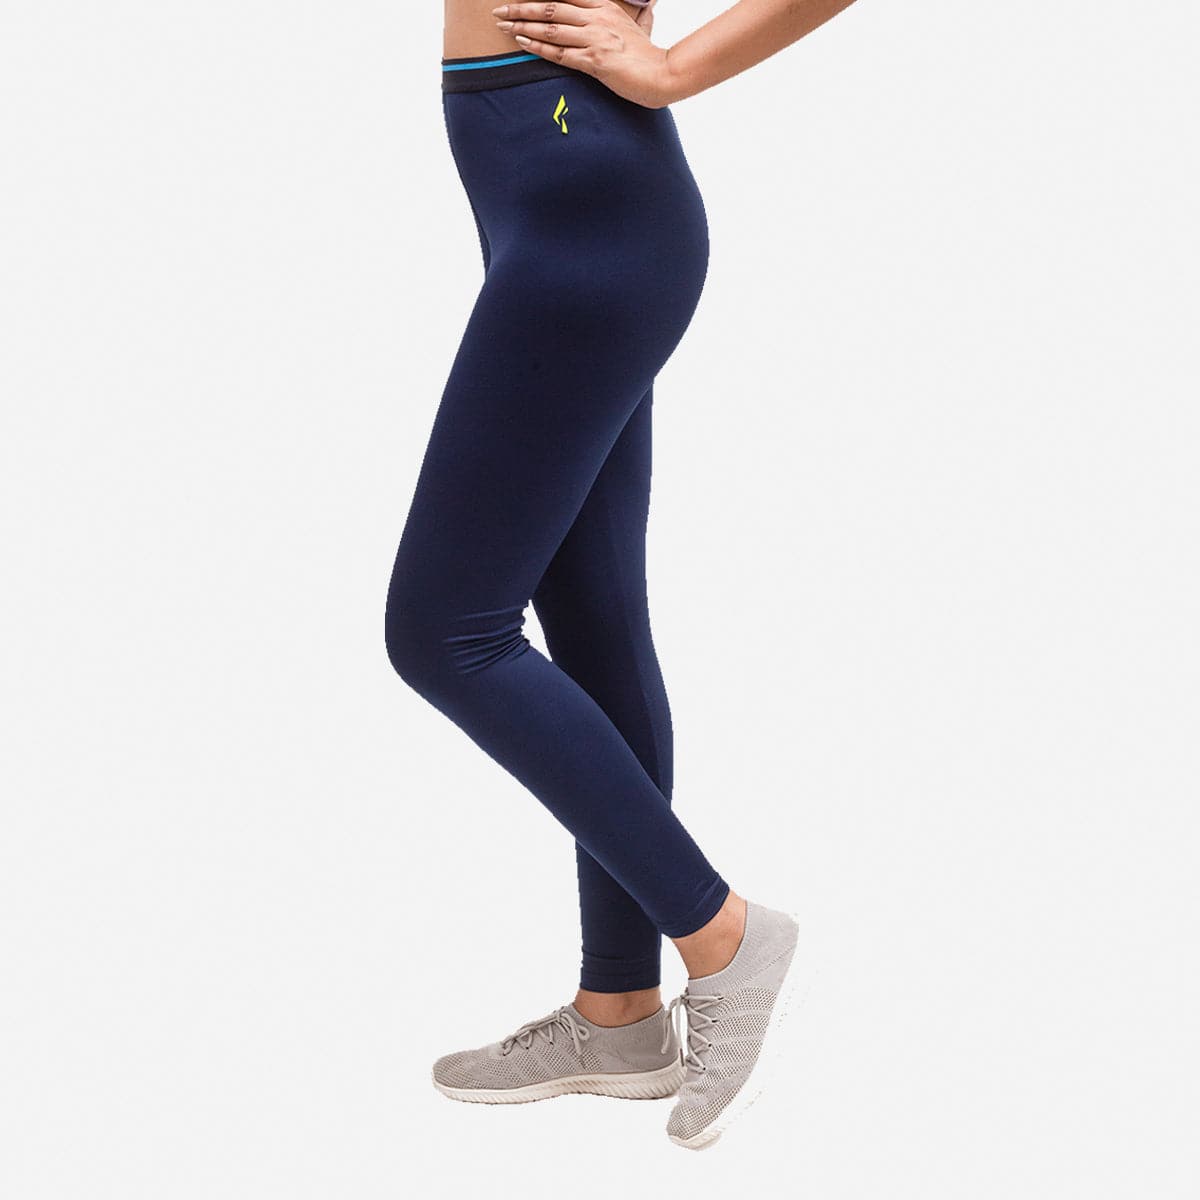 Women’s Base Layer Workout Athletic Leggings - Navy Blue - Valetica Sports